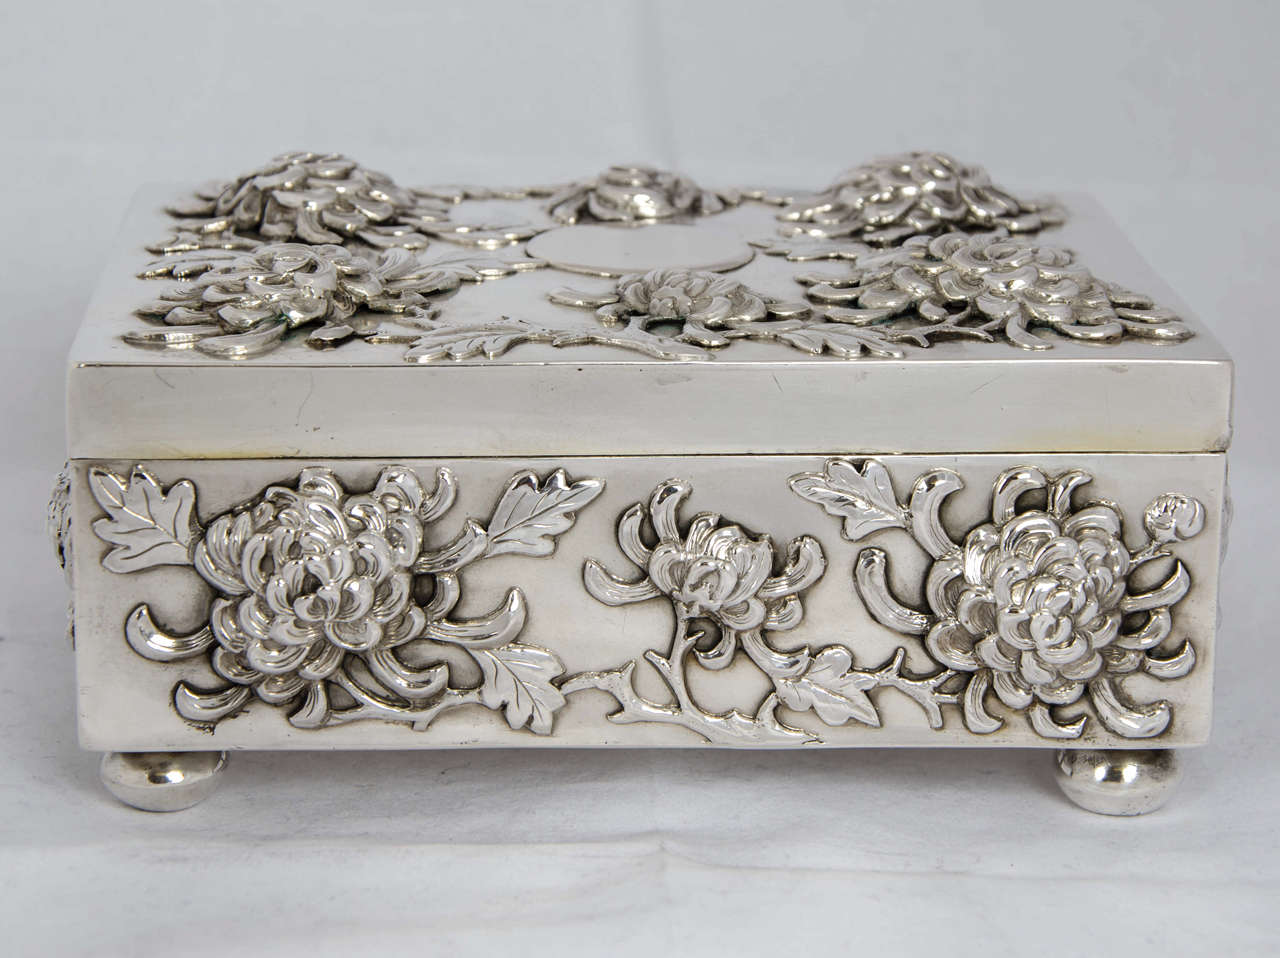 A Chinese export silver box with applied pronounced chrysanthemum decoration to the hinged lid and all four sides. The box was made circa 1890 by the firm of Hung Chong who had shops in Shanghai and Canton.
The box stands on four bun feet and